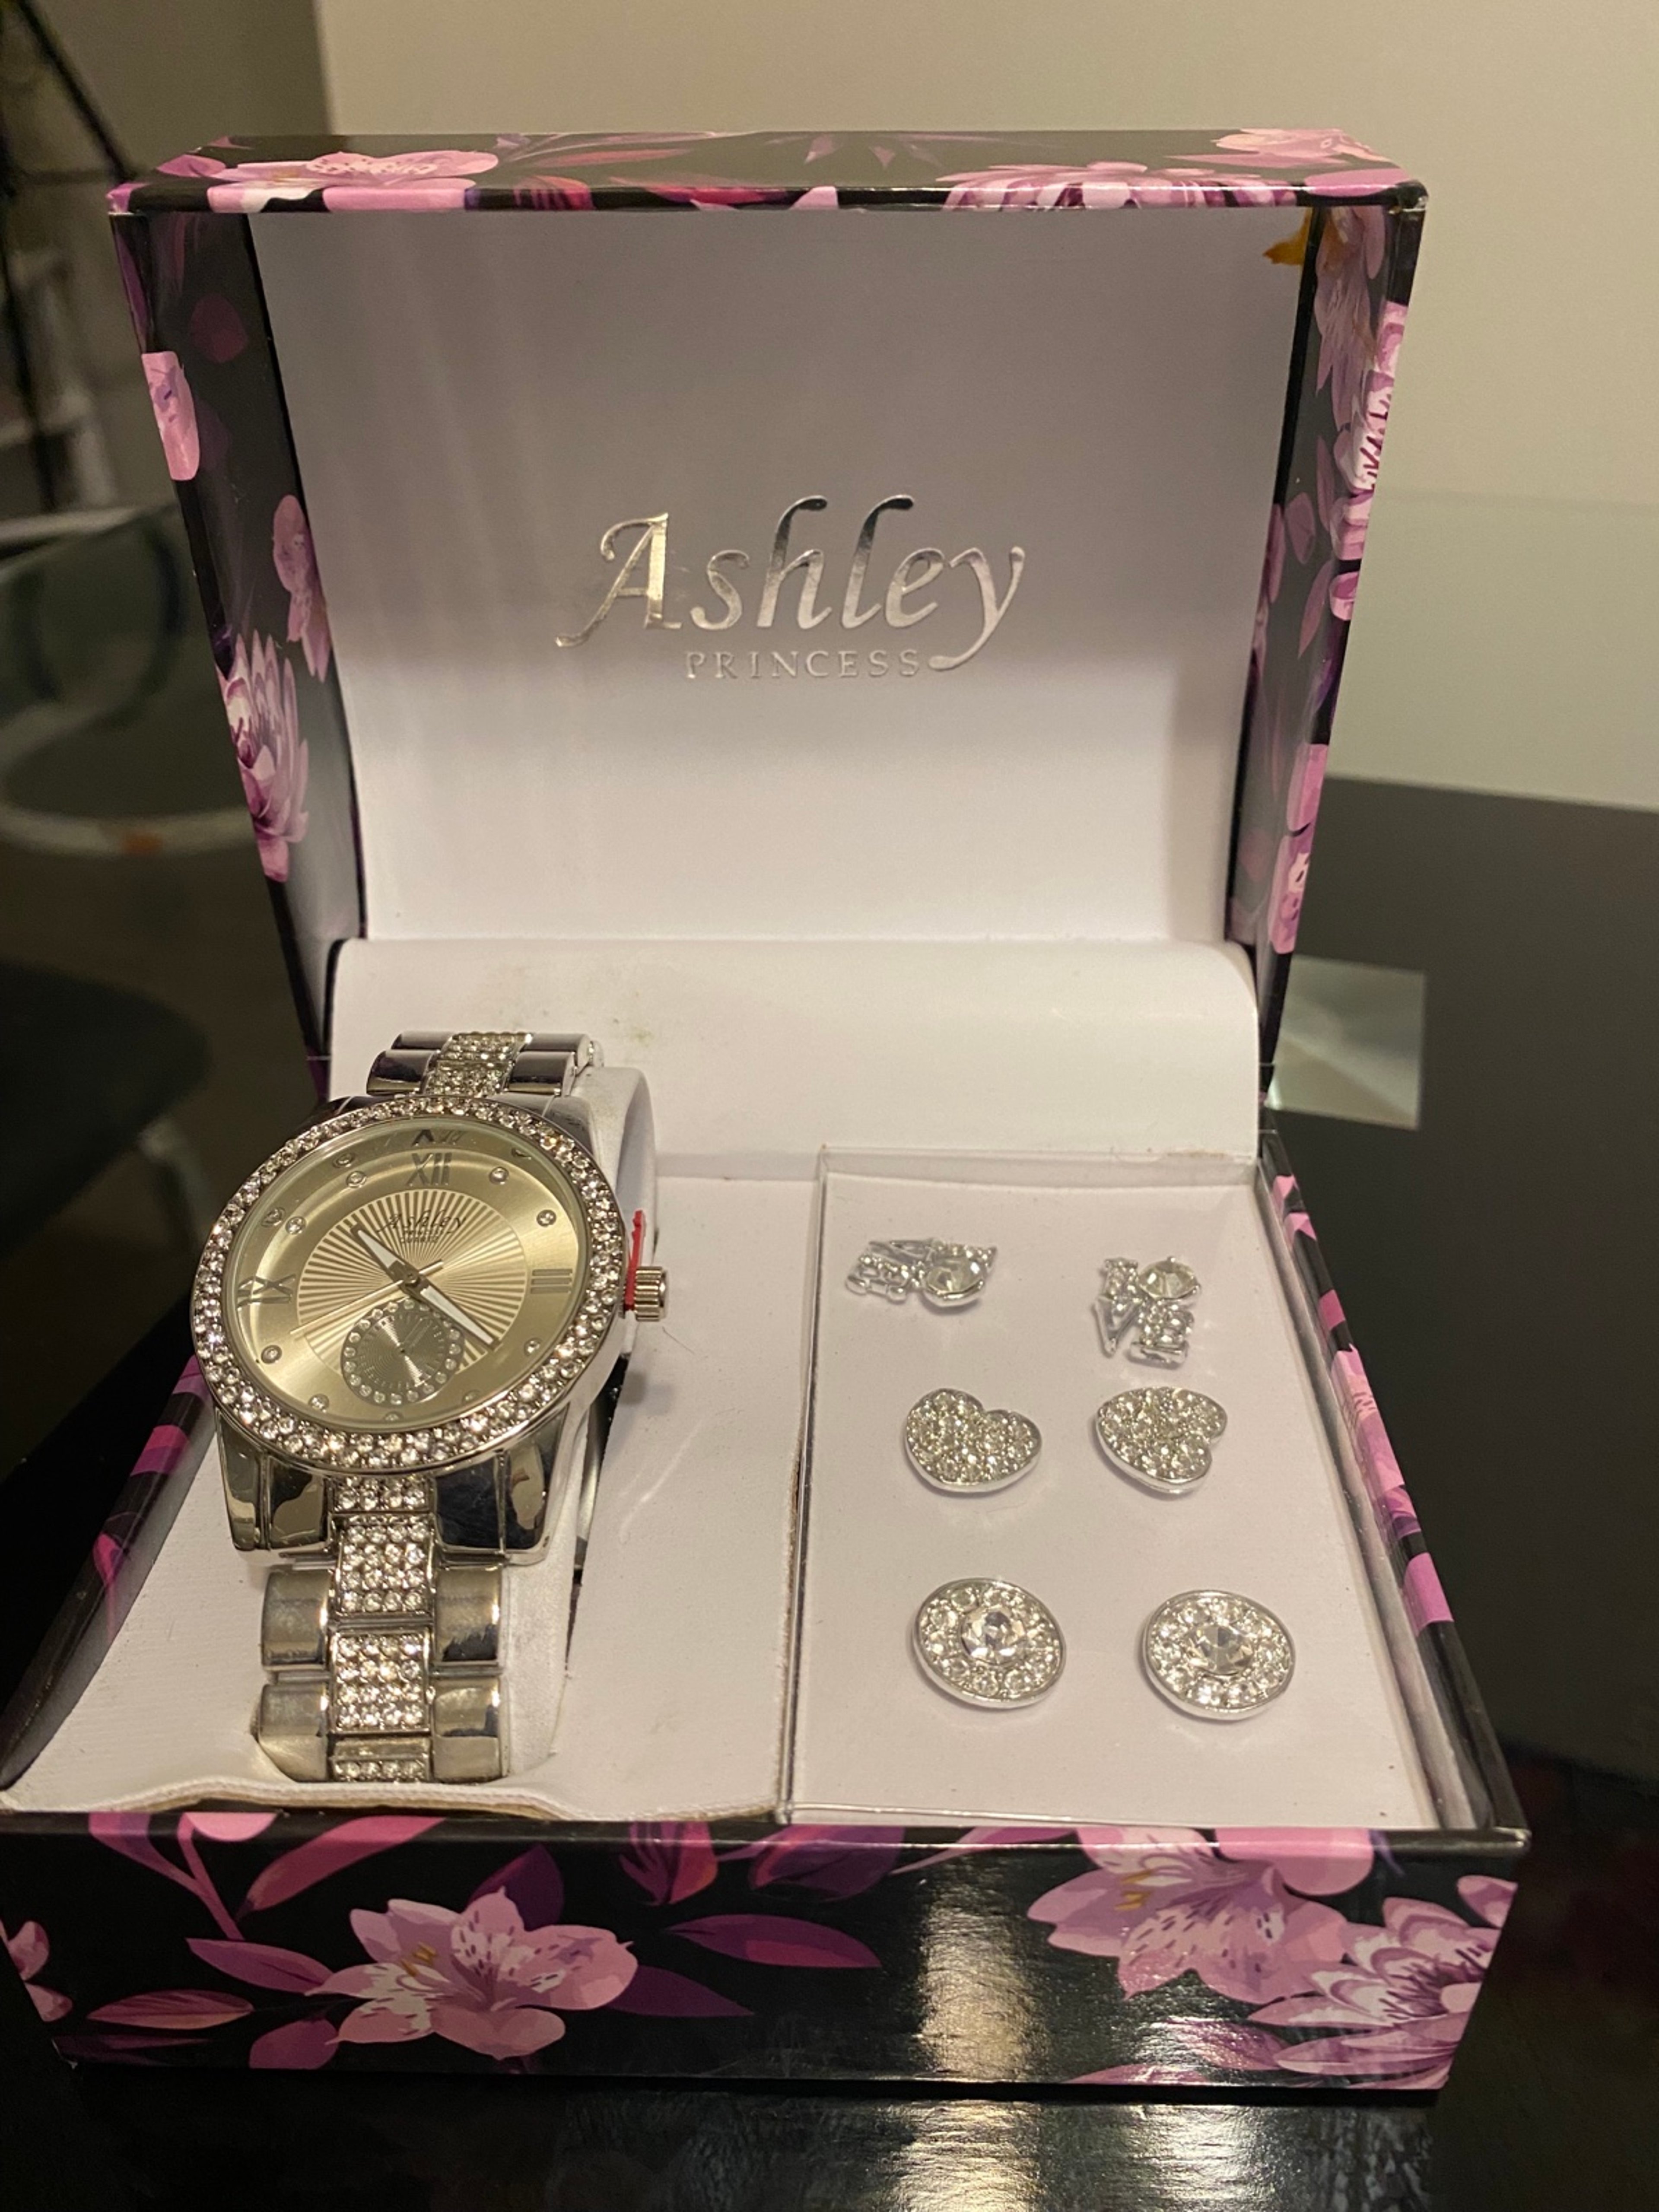 ashlee sewell recommends ashley princess watches pic